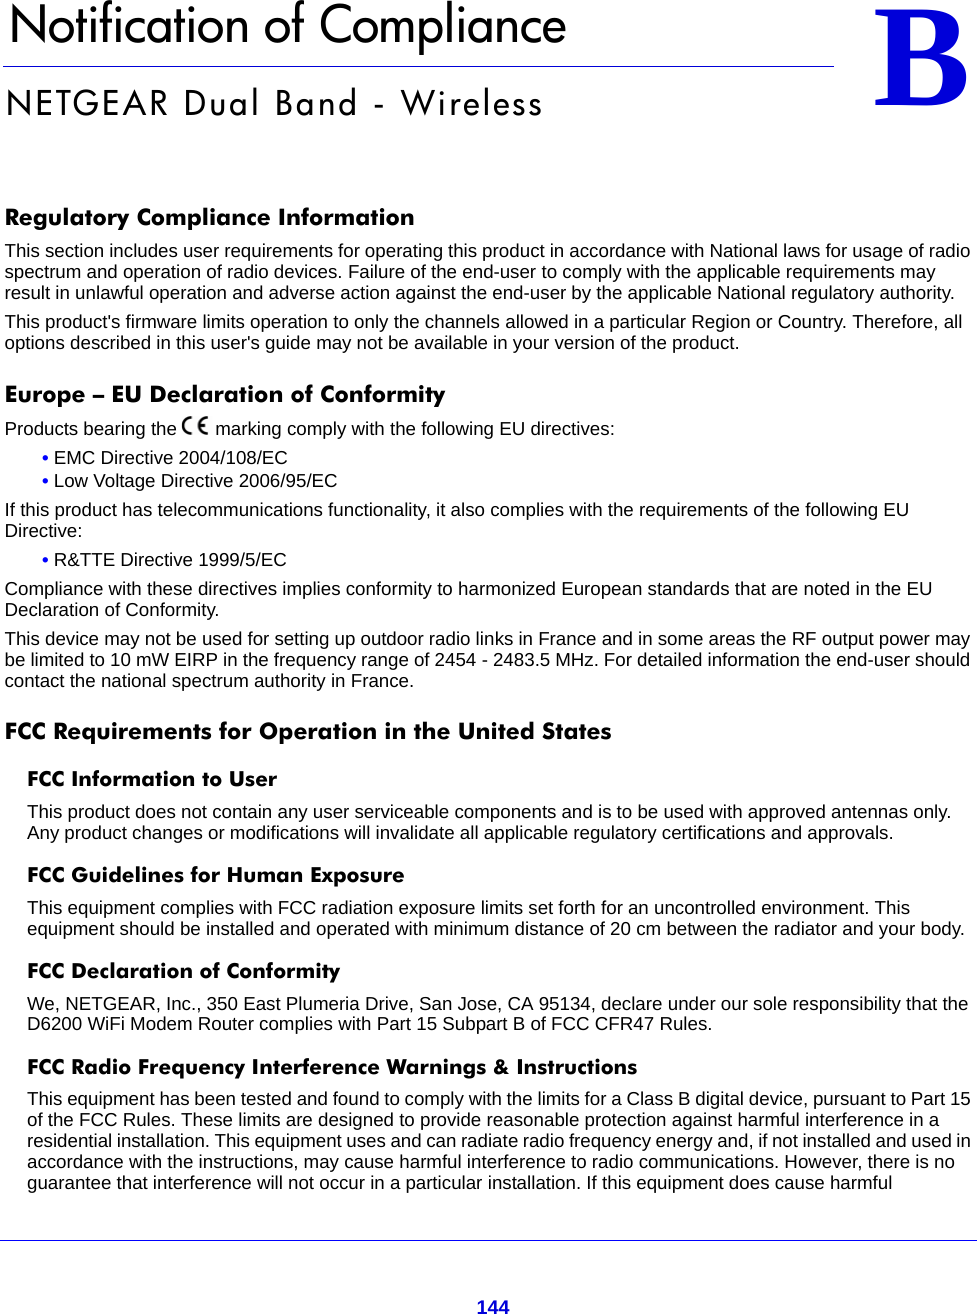 144BB.   Notification of ComplianceNETGEAR Dual Band - WirelessRegulatory Compliance InformationThis section includes user requirements for operating this product in accordance with National laws for usage of radio spectrum and operation of radio devices. Failure of the end-user to comply with the applicable requirements may result in unlawful operation and adverse action against the end-user by the applicable National regulatory authority.This product&apos;s firmware limits operation to only the channels allowed in a particular Region or Country. Therefore, all options described in this user&apos;s guide may not be available in your version of the product.Europe – EU Declaration of Conformity Products bearing the marking comply with the following EU directives:• EMC Directive 2004/108/EC• Low Voltage Directive 2006/95/ECIf this product has telecommunications functionality, it also complies with the requirements of the following EU Directive:• R&amp;TTE Directive 1999/5/ECCompliance with these directives implies conformity to harmonized European standards that are noted in the EU Declaration of Conformity. This device may not be used for setting up outdoor radio links in France and in some areas the RF output power may be limited to 10 mW EIRP in the frequency range of 2454 - 2483.5 MHz. For detailed information the end-user should contact the national spectrum authority in France.FCC Requirements for Operation in the United States FCC Information to UserThis product does not contain any user serviceable components and is to be used with approved antennas only. Any product changes or modifications will invalidate all applicable regulatory certifications and approvals.FCC Guidelines for Human ExposureThis equipment complies with FCC radiation exposure limits set forth for an uncontrolled environment. This equipment should be installed and operated with minimum distance of 20 cm between the radiator and your body.FCC Declaration of ConformityWe, NETGEAR, Inc., 350 East Plumeria Drive, San Jose, CA 95134, declare under our sole responsibility that the D6200 WiFi Modem Router complies with Part 15 Subpart B of FCC CFR47 Rules.FCC Radio Frequency Interference Warnings &amp; InstructionsThis equipment has been tested and found to comply with the limits for a Class B digital device, pursuant to Part 15 of the FCC Rules. These limits are designed to provide reasonable protection against harmful interference in a residential installation. This equipment uses and can radiate radio frequency energy and, if not installed and used in accordance with the instructions, may cause harmful interference to radio communications. However, there is no guarantee that interference will not occur in a particular installation. If this equipment does cause harmful 